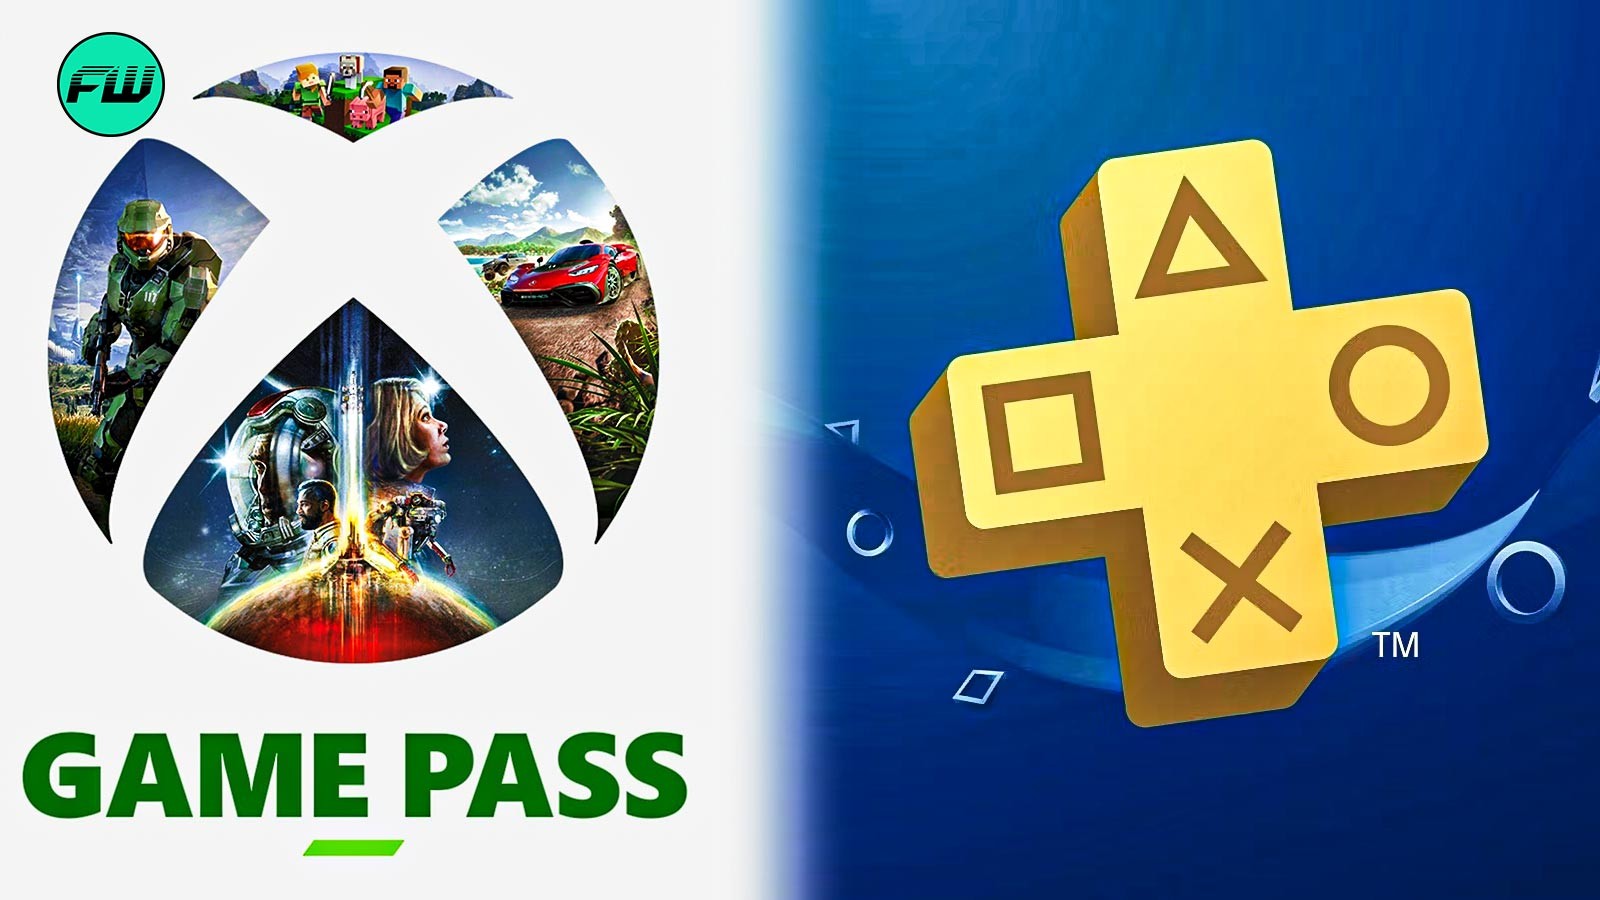 Xbox Game Pass and Playstation Plus